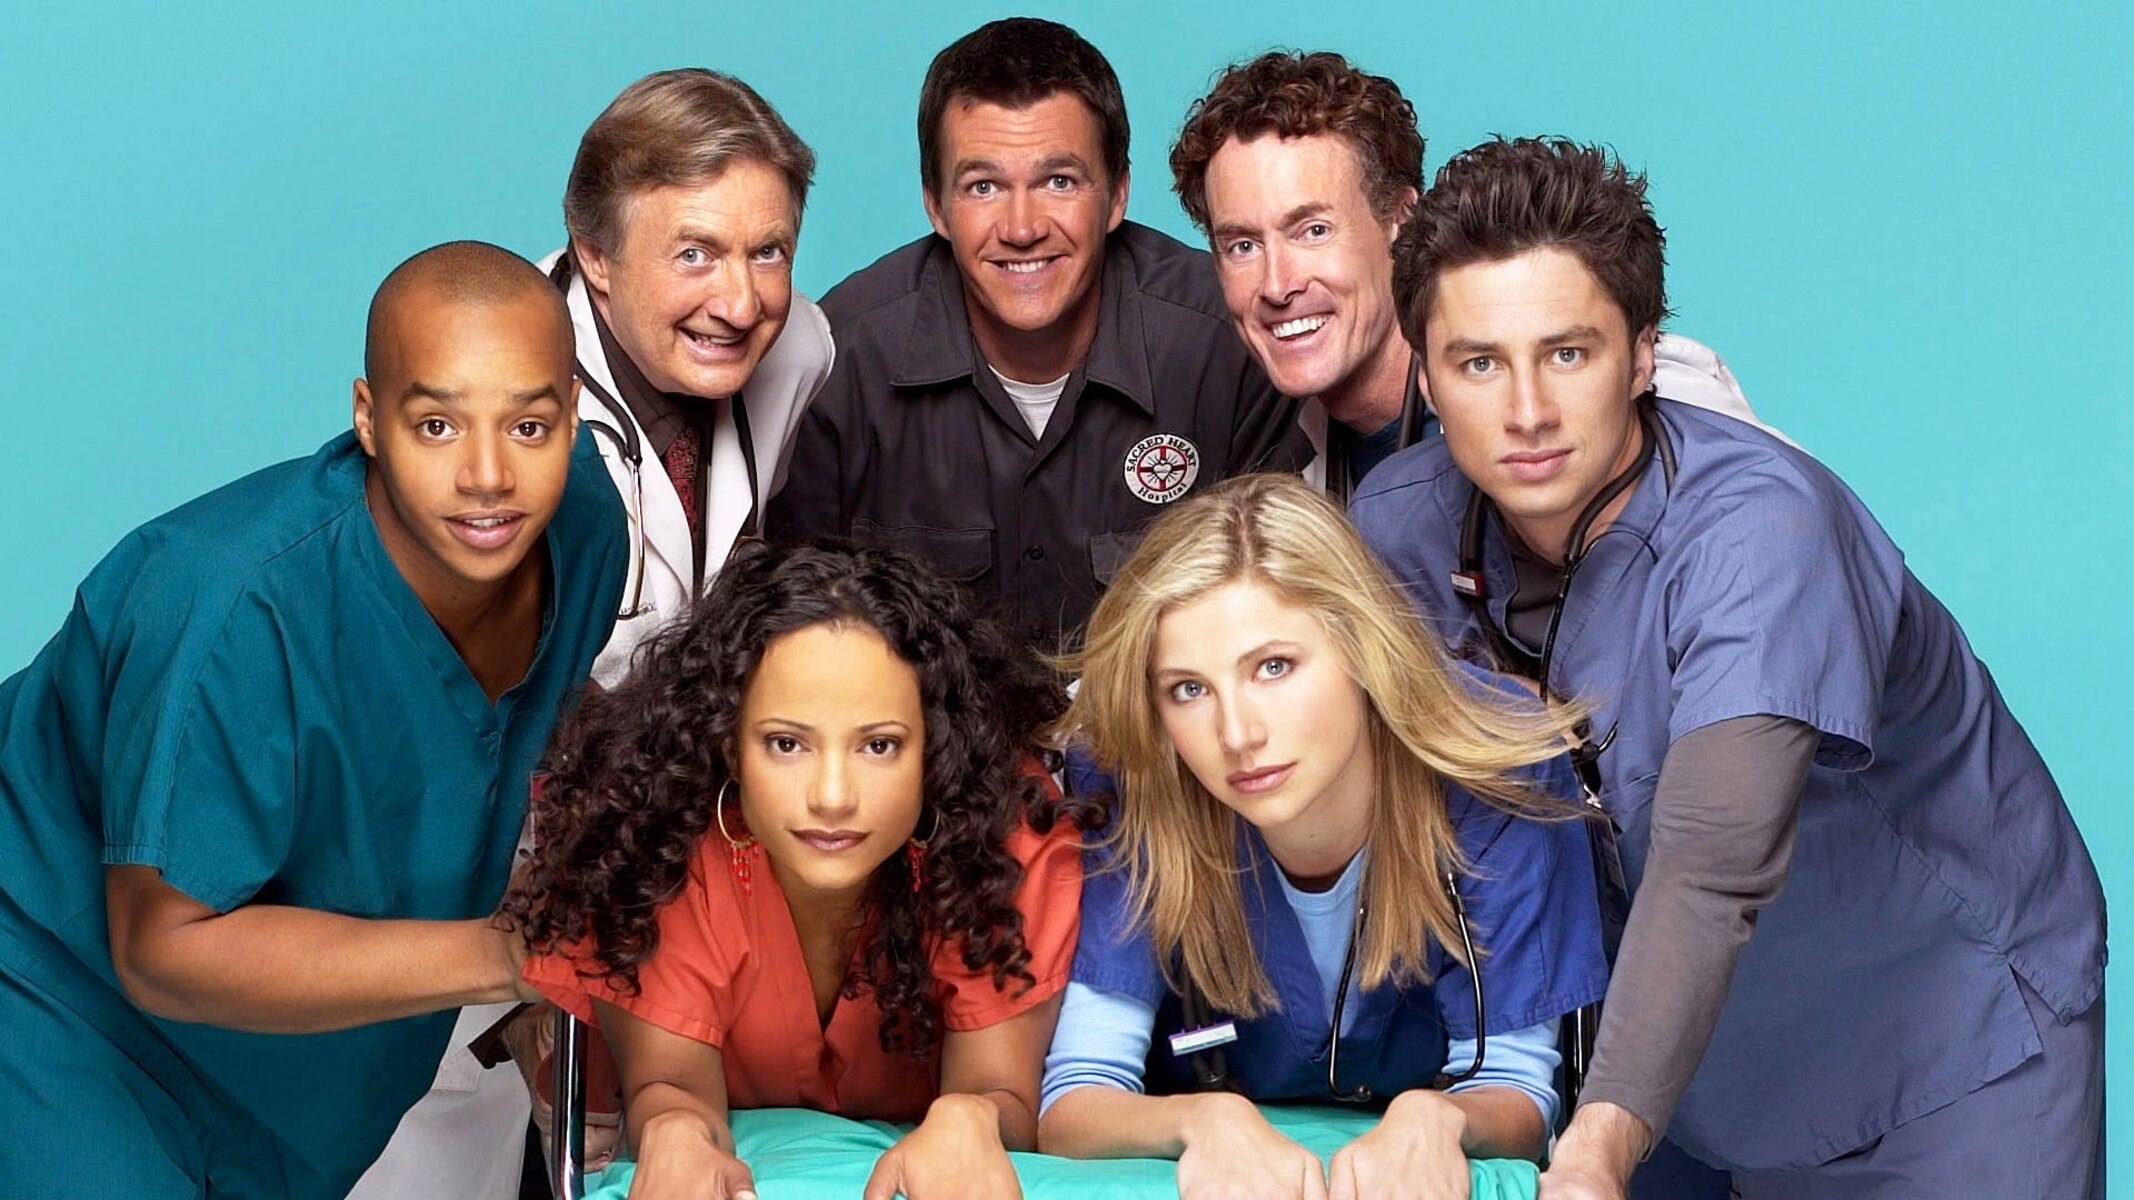 How To Watch Scrubs Online